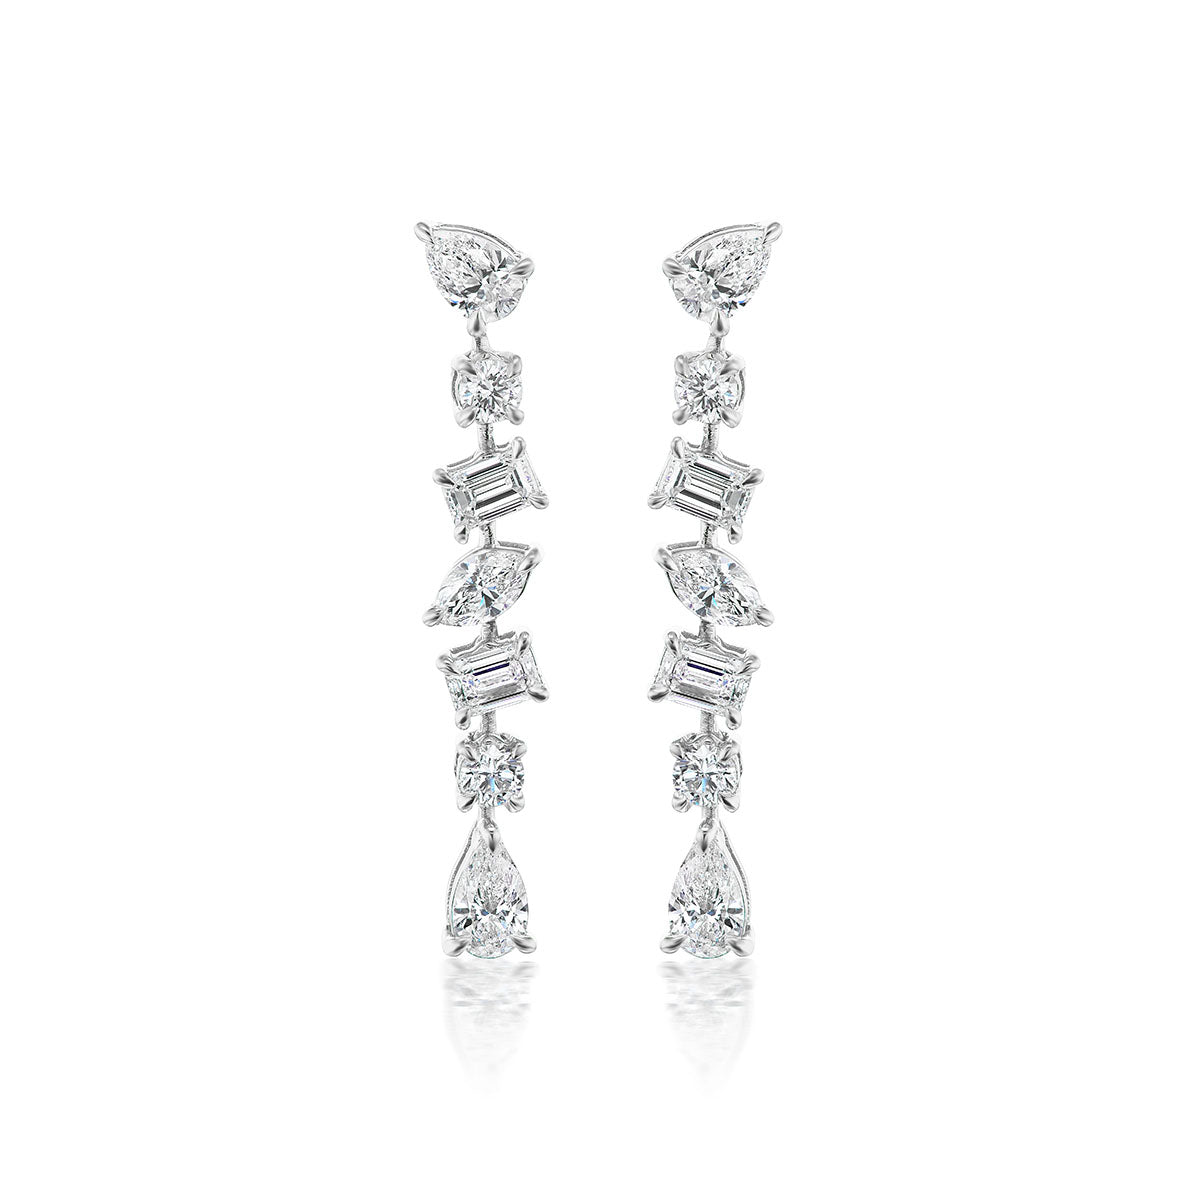 Tennis Drop Earrings in White Gold with Mixed Shape Diamonds